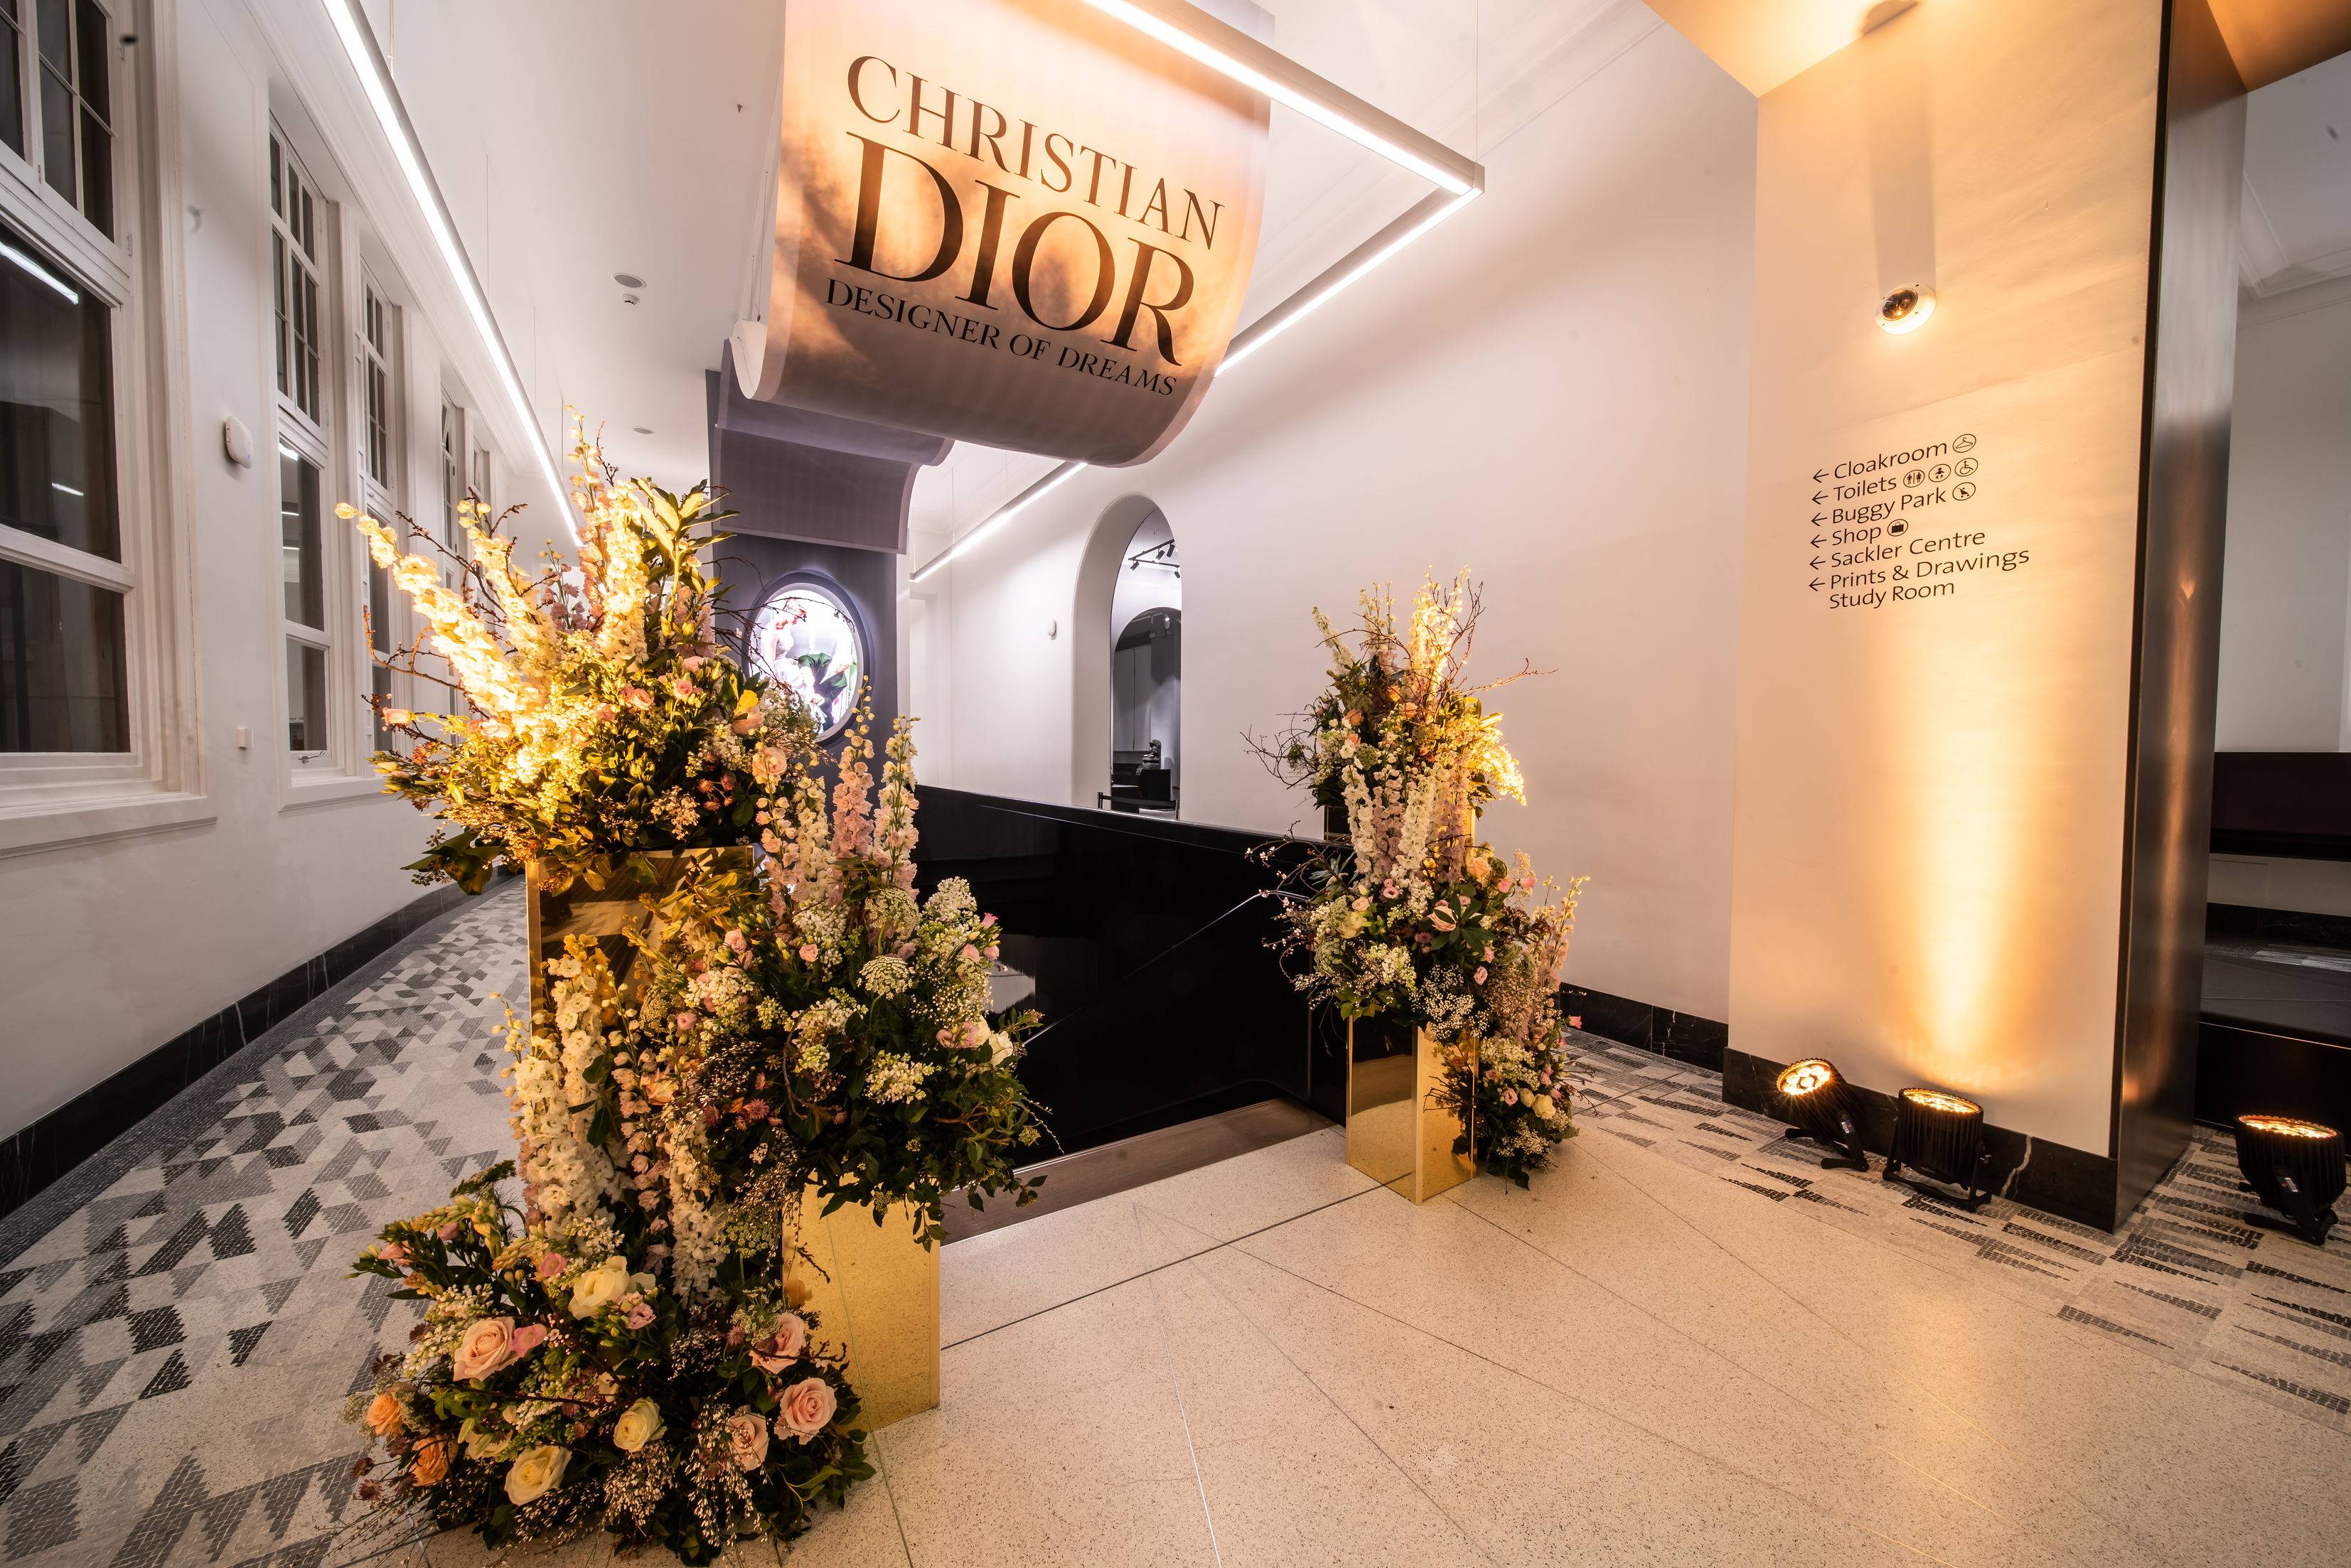 Christian Dior V&A exhibition, Private viewing event at the V&A, Luxury event planner, Corporate event planners, Garden party at the V&A